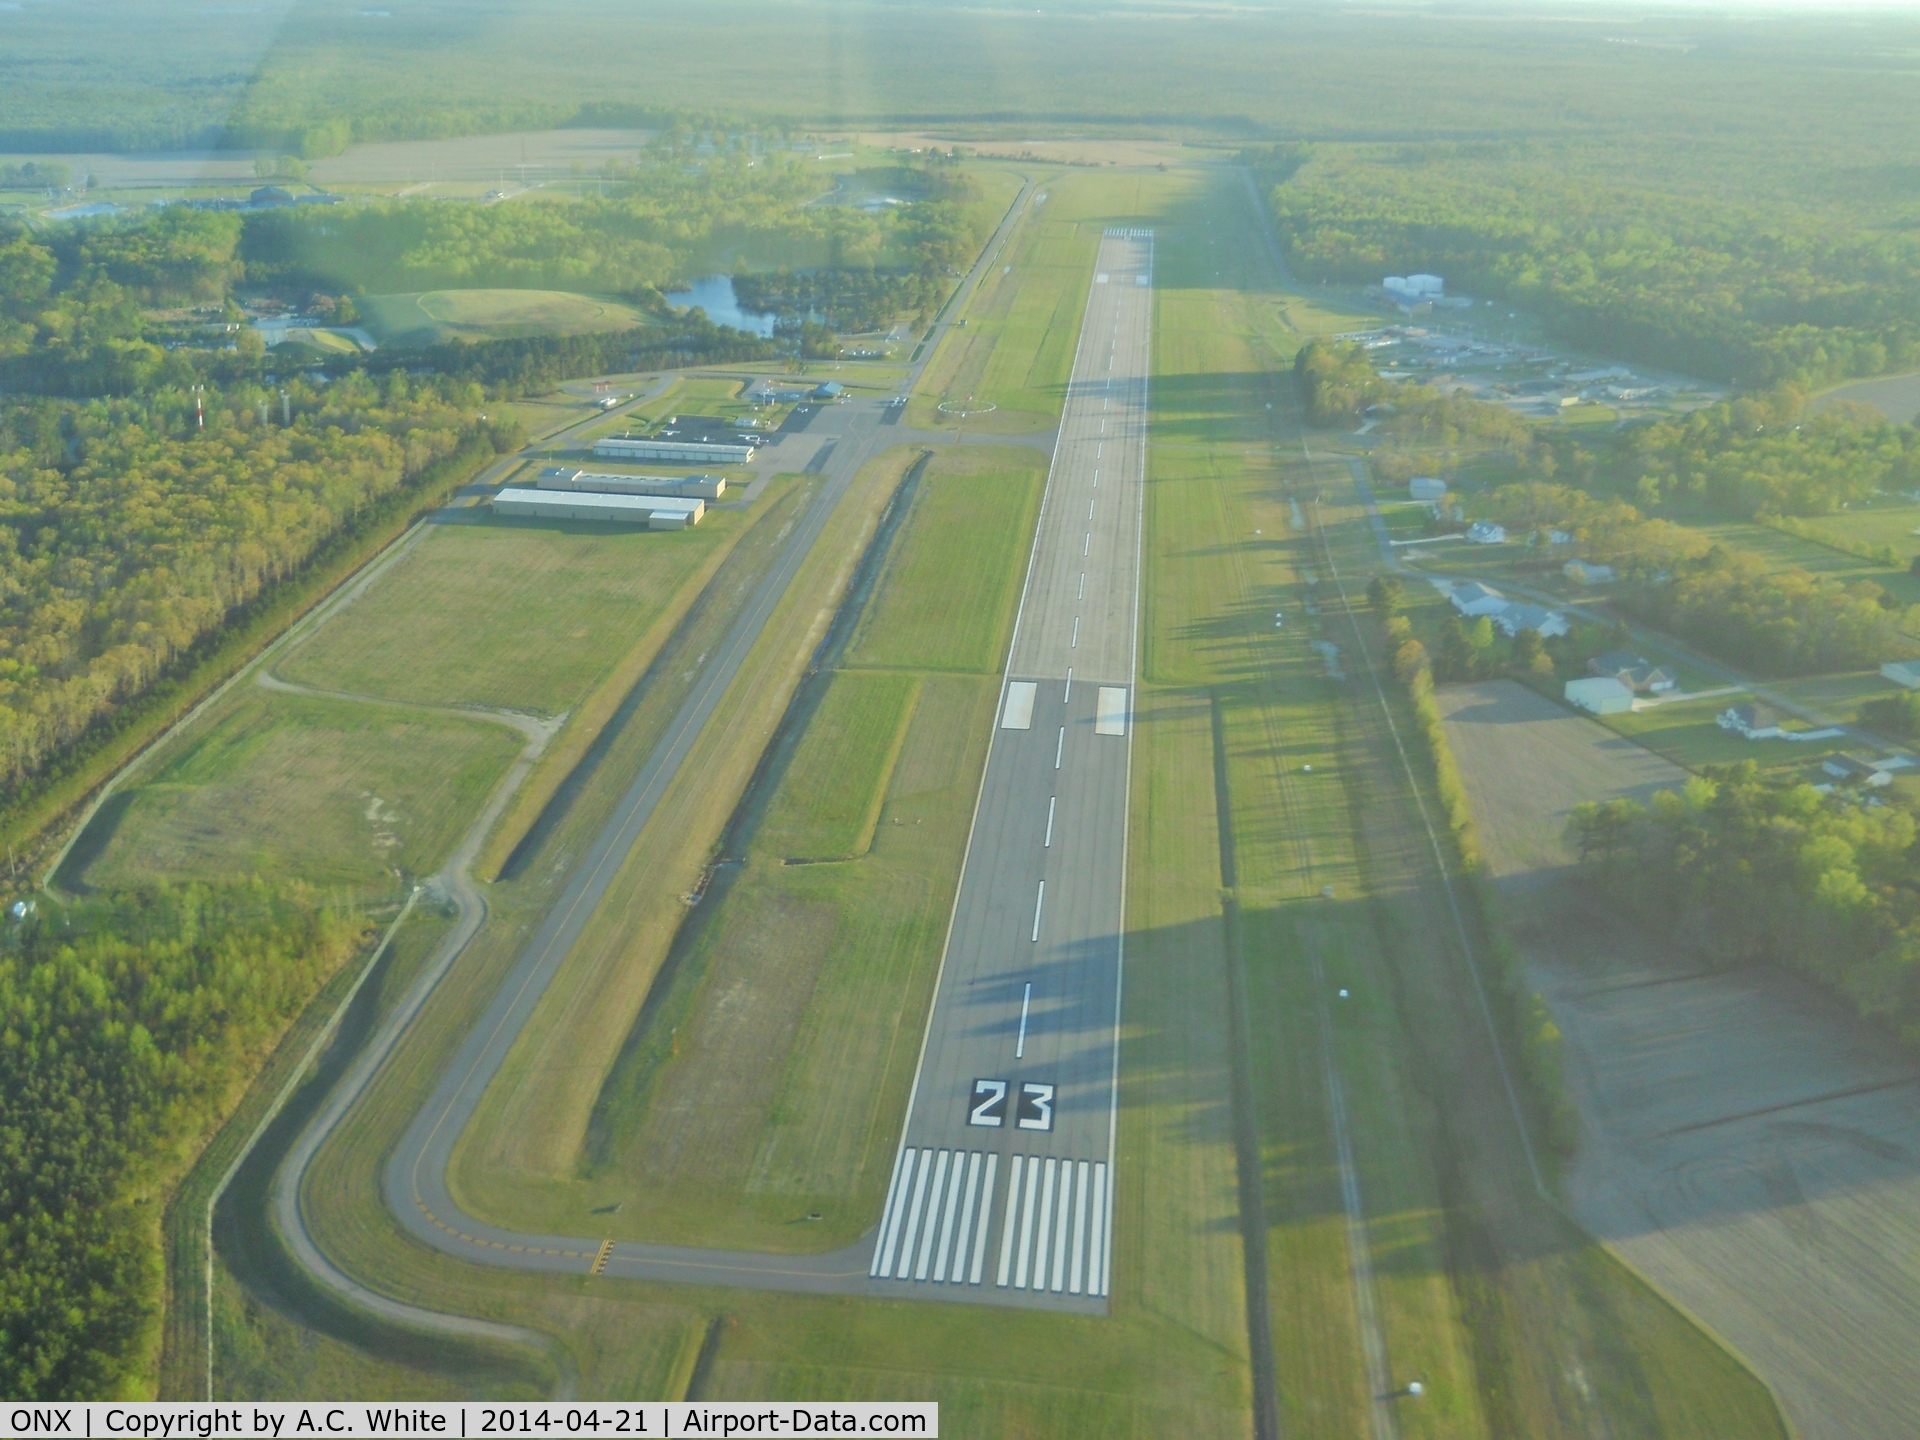 Currituck County Regional Airport (ONX) - Crosswind for runway 5 on a beautiful NC evening.